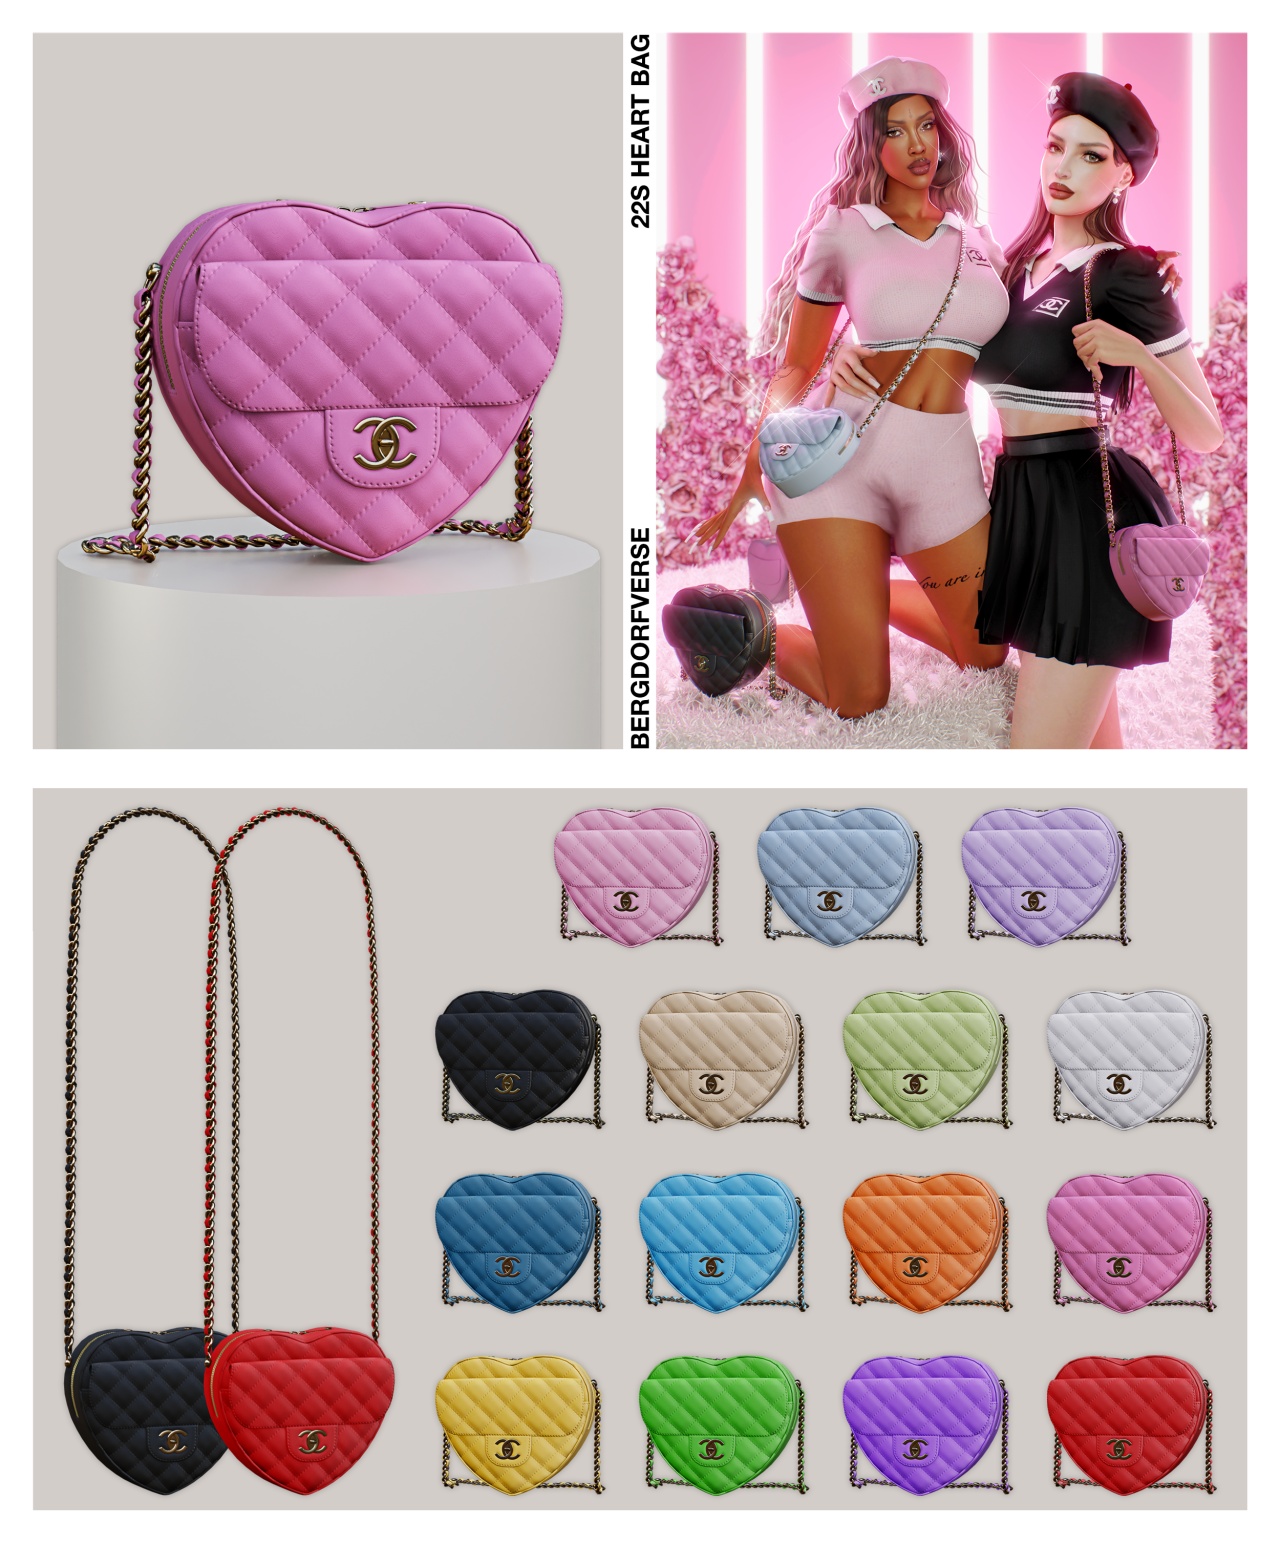 LV GAME ON CŒUR HEART BAG  Sims 4 collections, Bags, The sims 4 packs